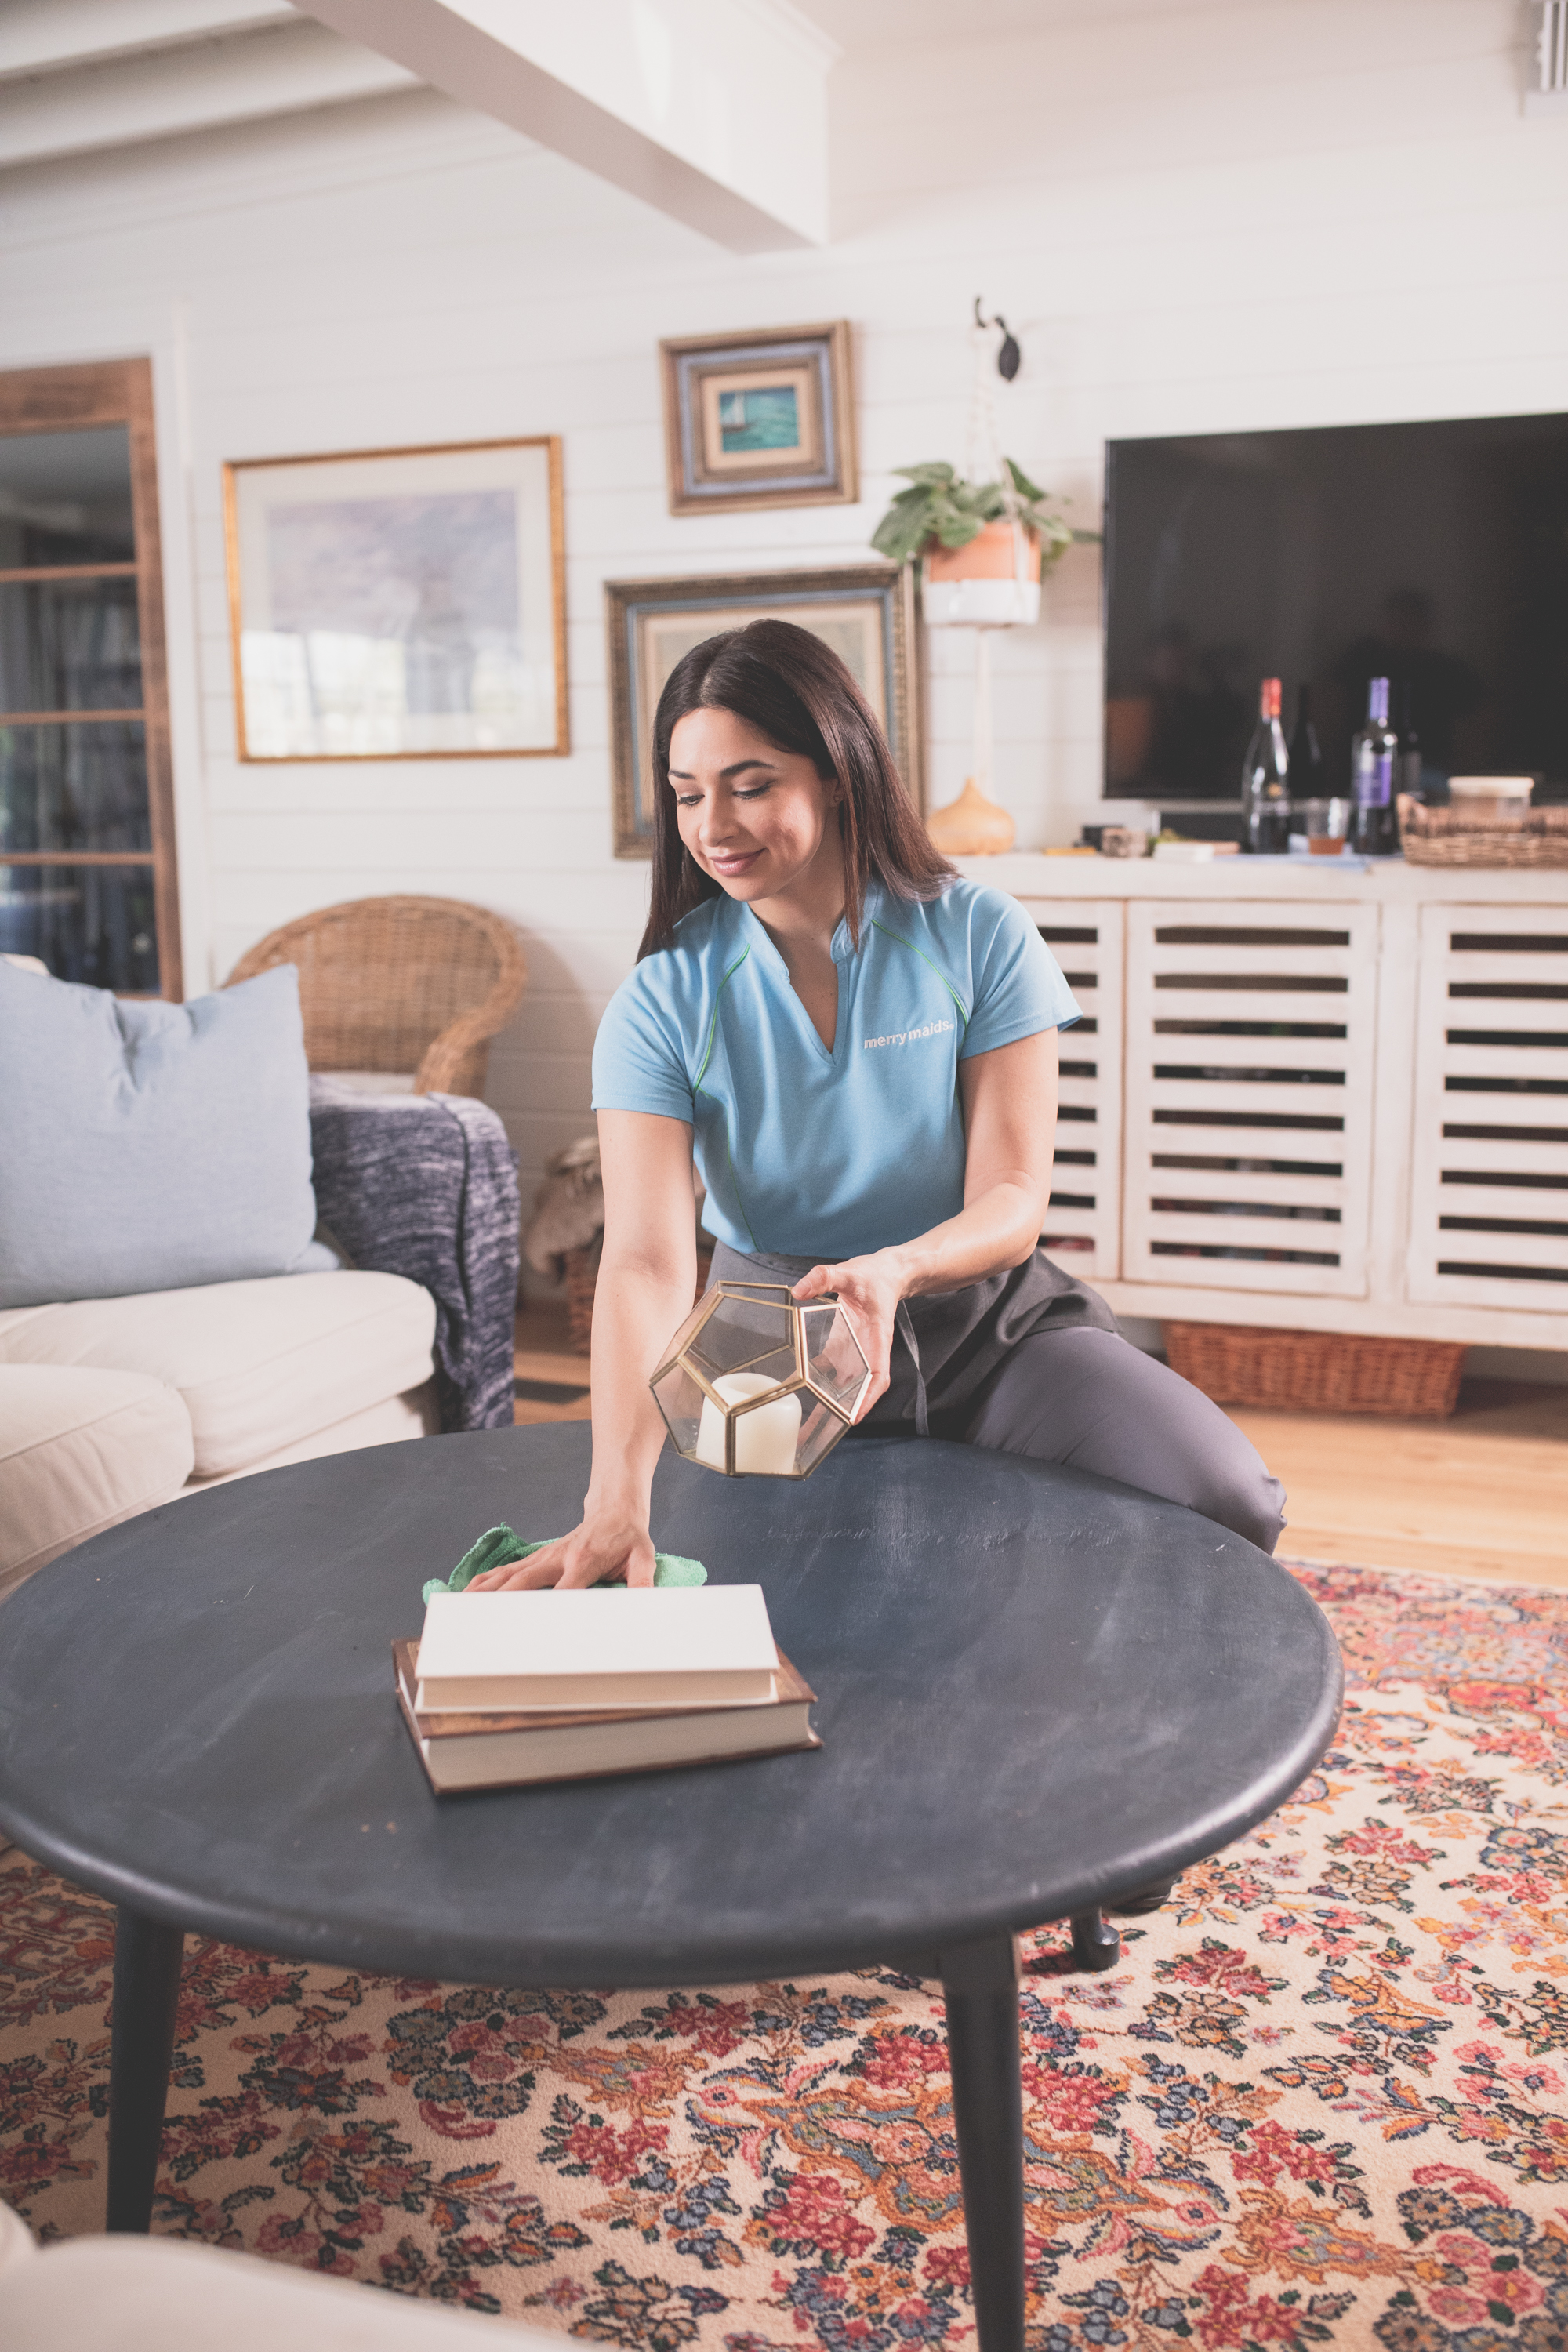  A Merry Maids expert wiping down a coffee table during maid service in Waco, TX